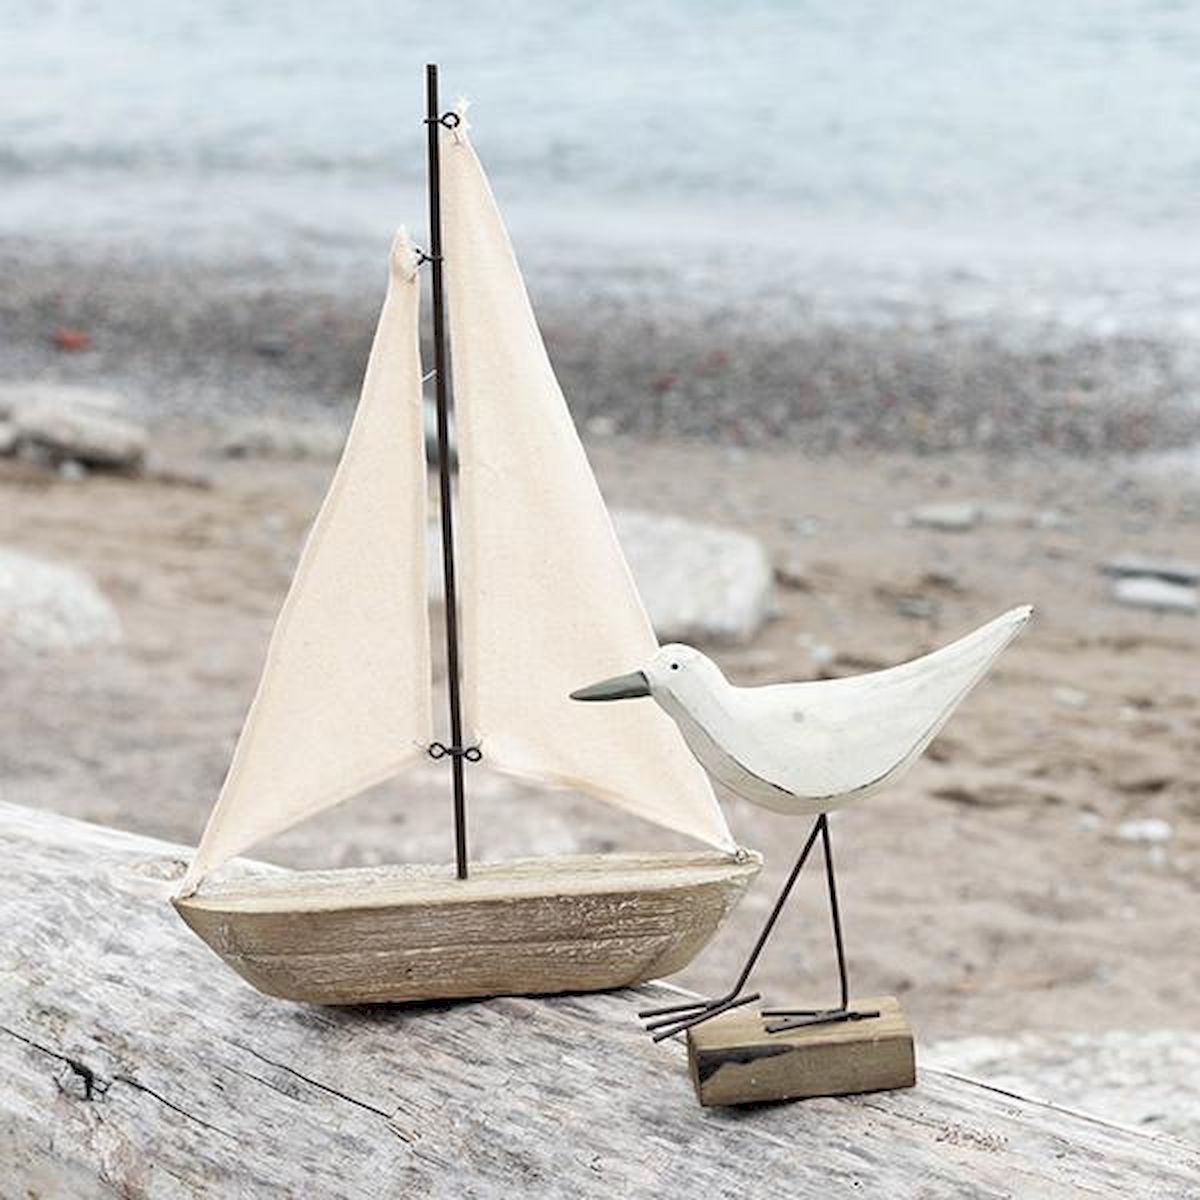 Picture of Forpost FP-HUS-323 Wooden Sailboat with Fabric Sail Figurine